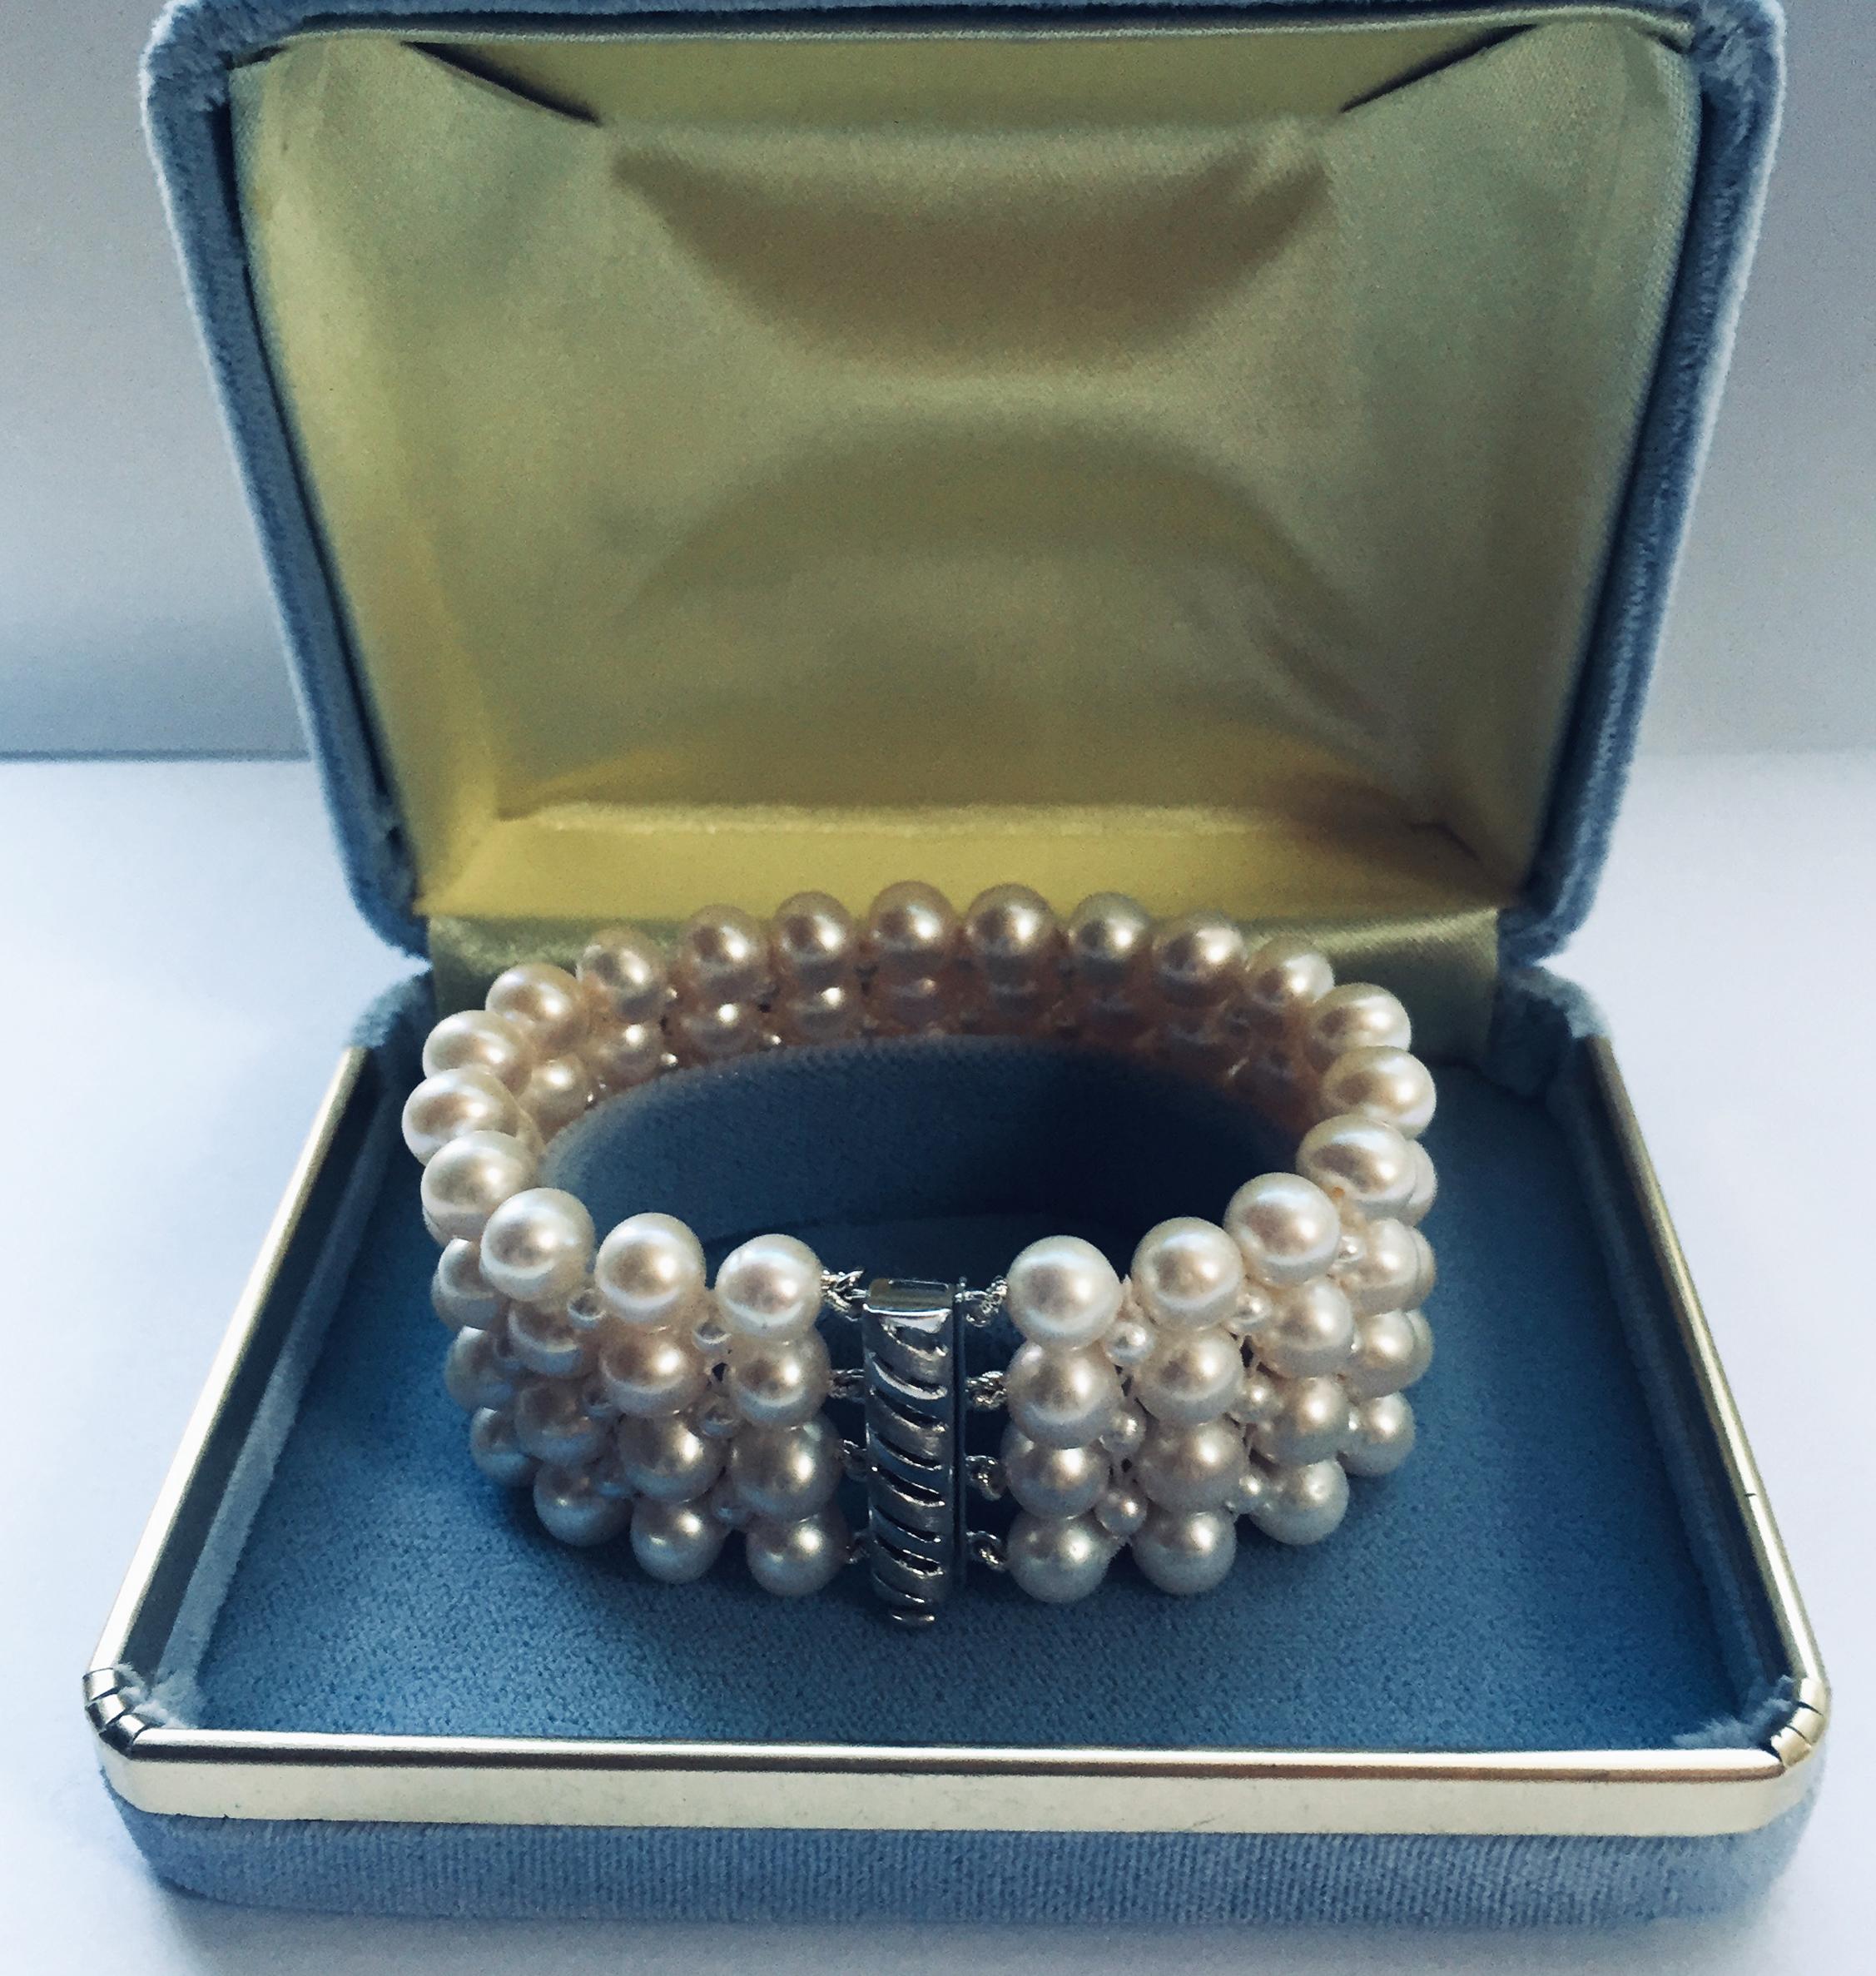 This beautiful, classic, and timeless bracelet has an elegant pearl weave. At a 1 inches, wide the different size pearls (5mm to 2mm) create a checkered design with 14k white gold plated clasp. It is easy to use and secure once fitted on the wrist.